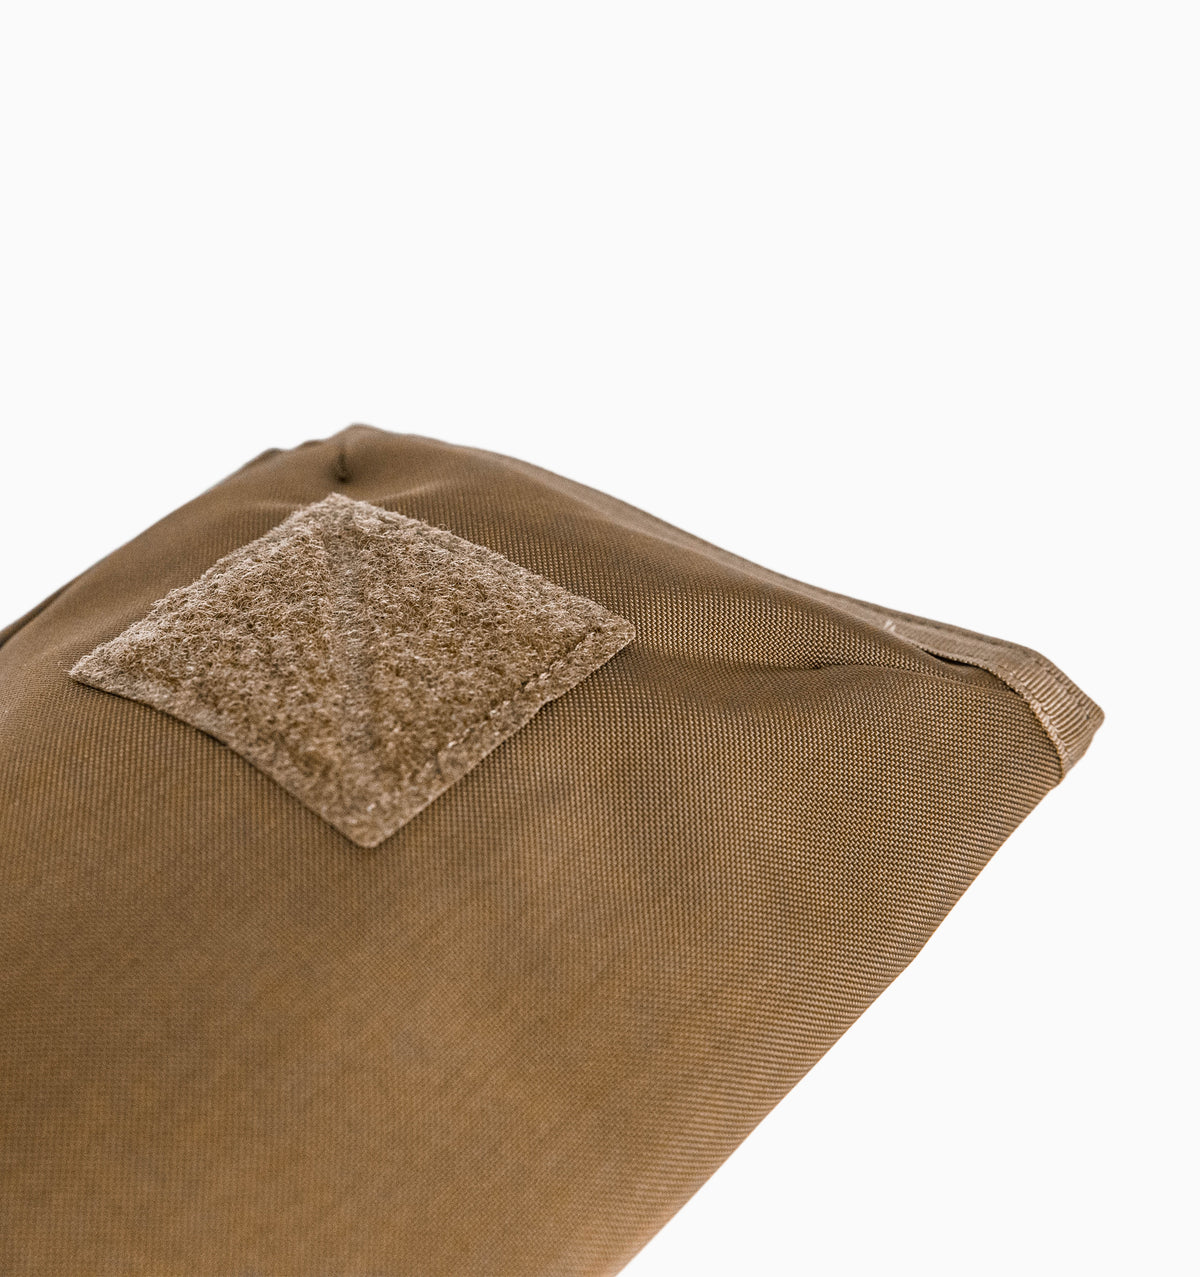 Evergoods Civic Access Pouch 1L - Coyote Brown